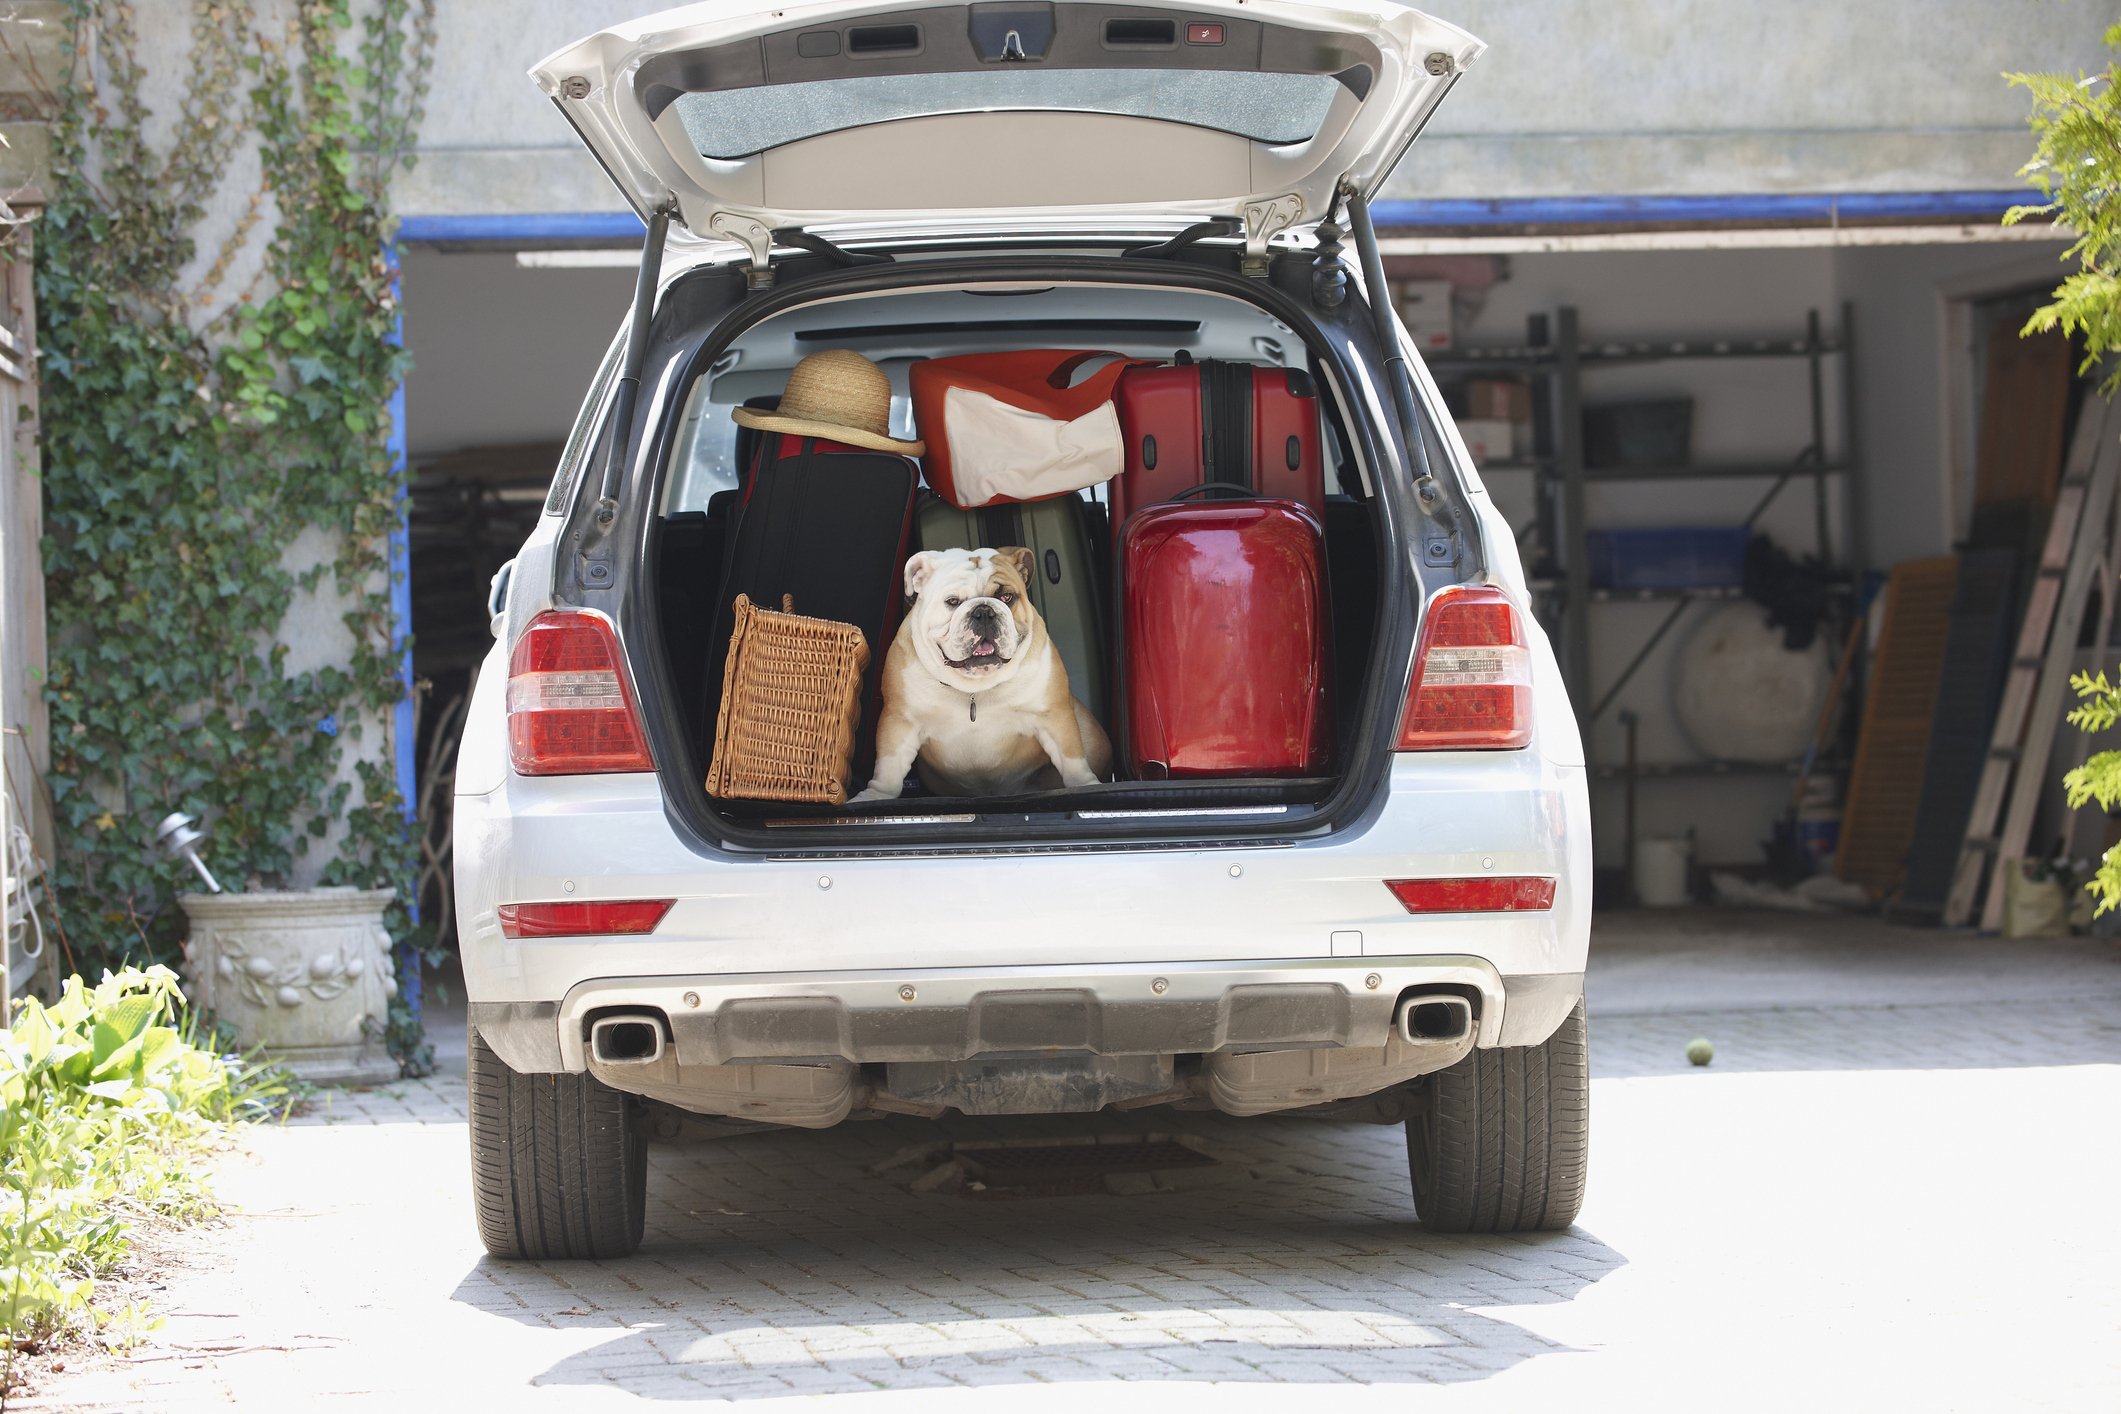 Check out these pet-friendly road trip destinations